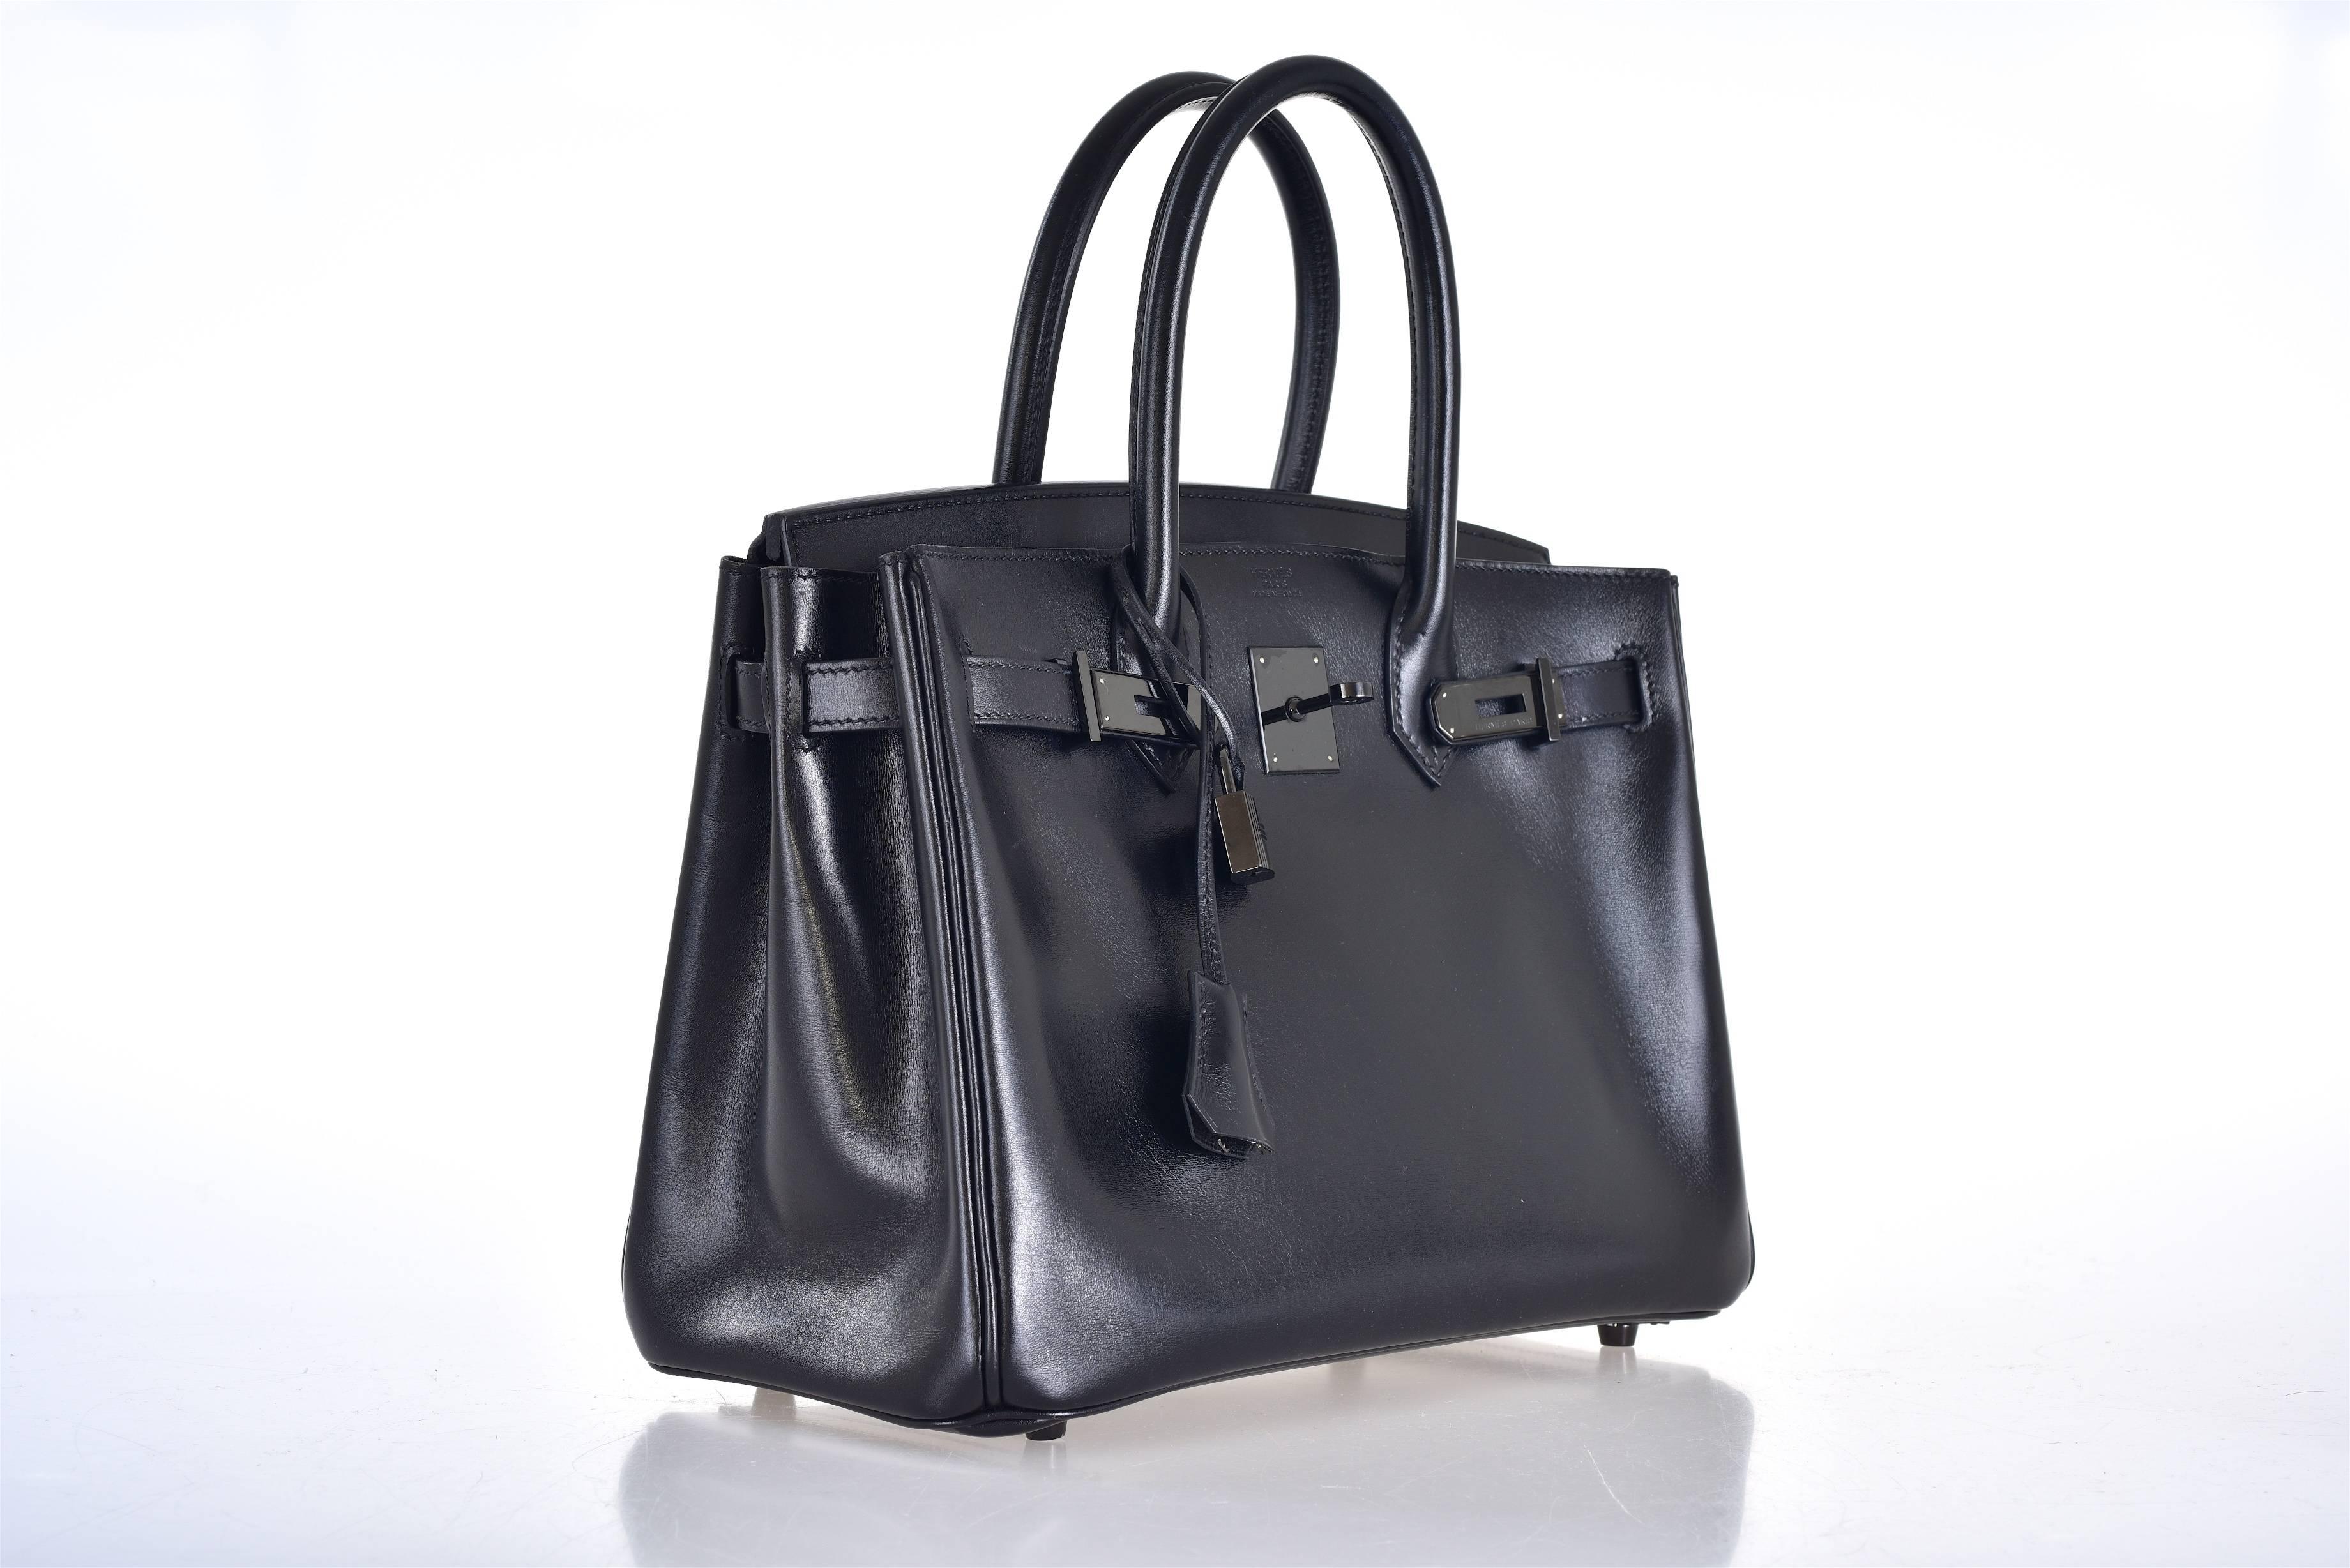 As always, another one of my fab finds! LIMITED Hermes 30cm SO BLACK box leather BIRKIN!
THIS BAG WILL TAKE YOUR BREATH AWAY! TRULY A MASTER PIECE!

This bag comes with lock, keys, clochette, a sleeper for the bag, and rain protector. No